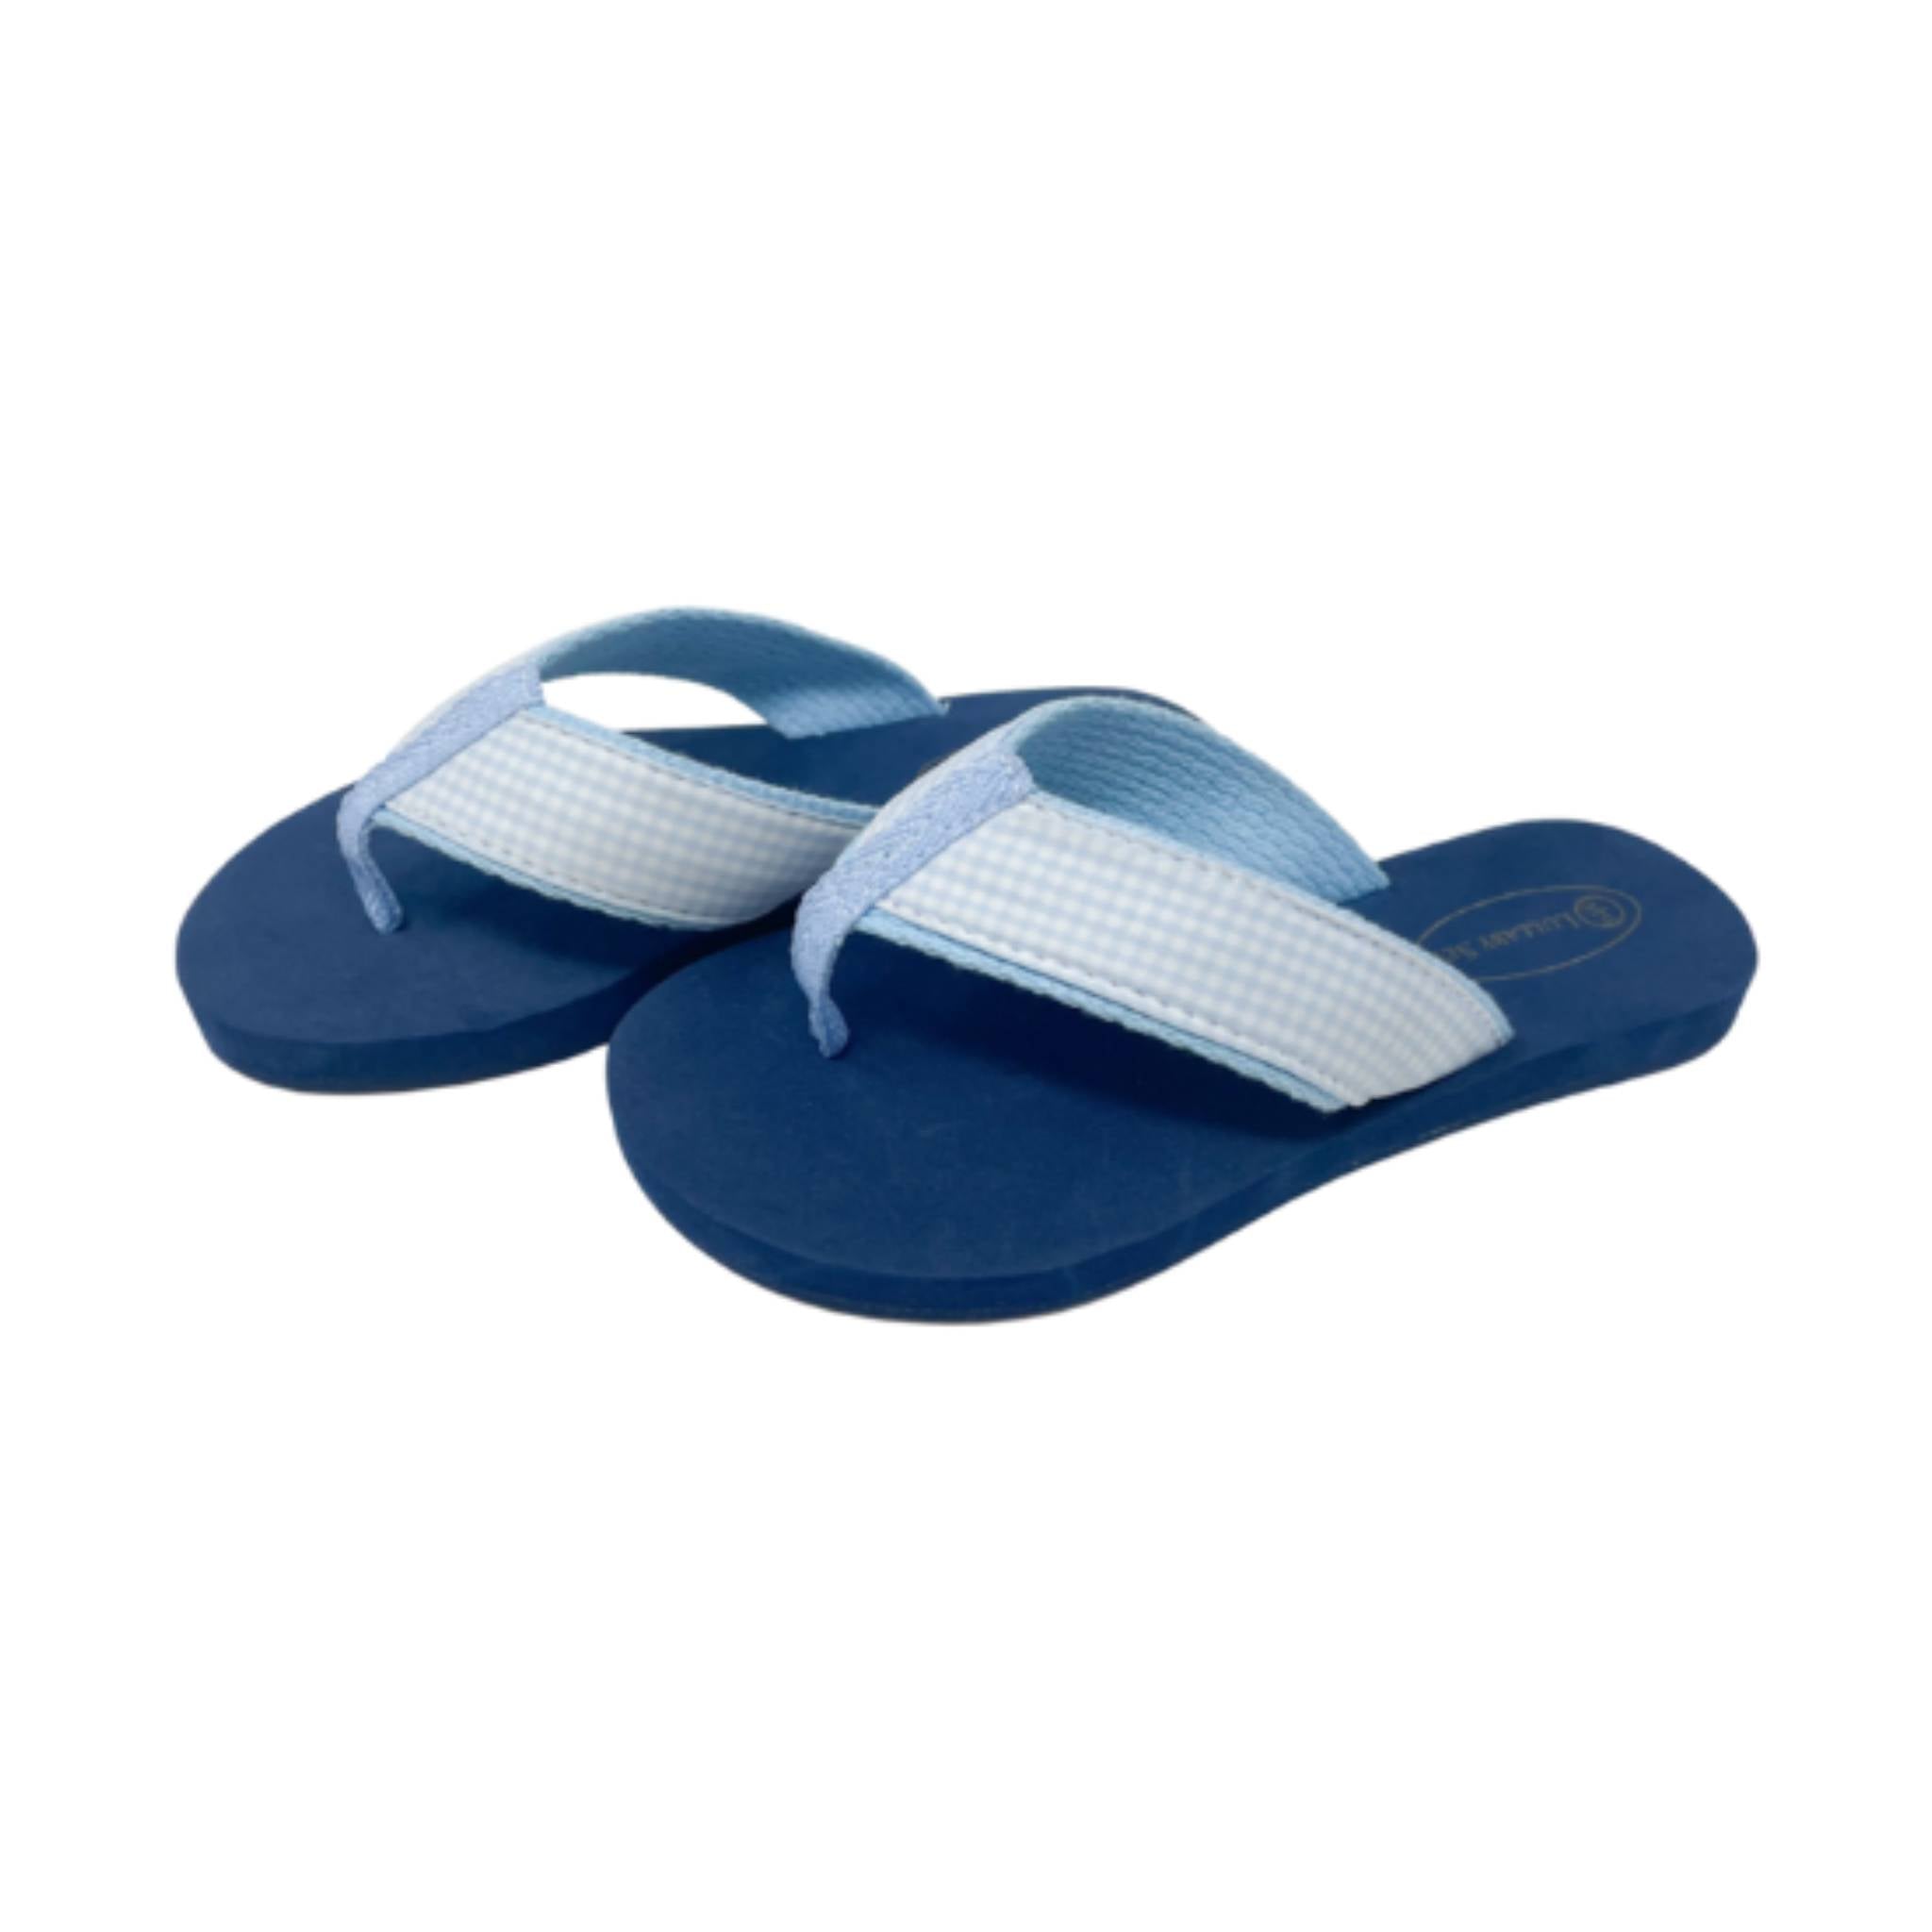 2021 Lowest Price] Paragon Mens Grey Formal Sandals-6 Price in India &  Specifications